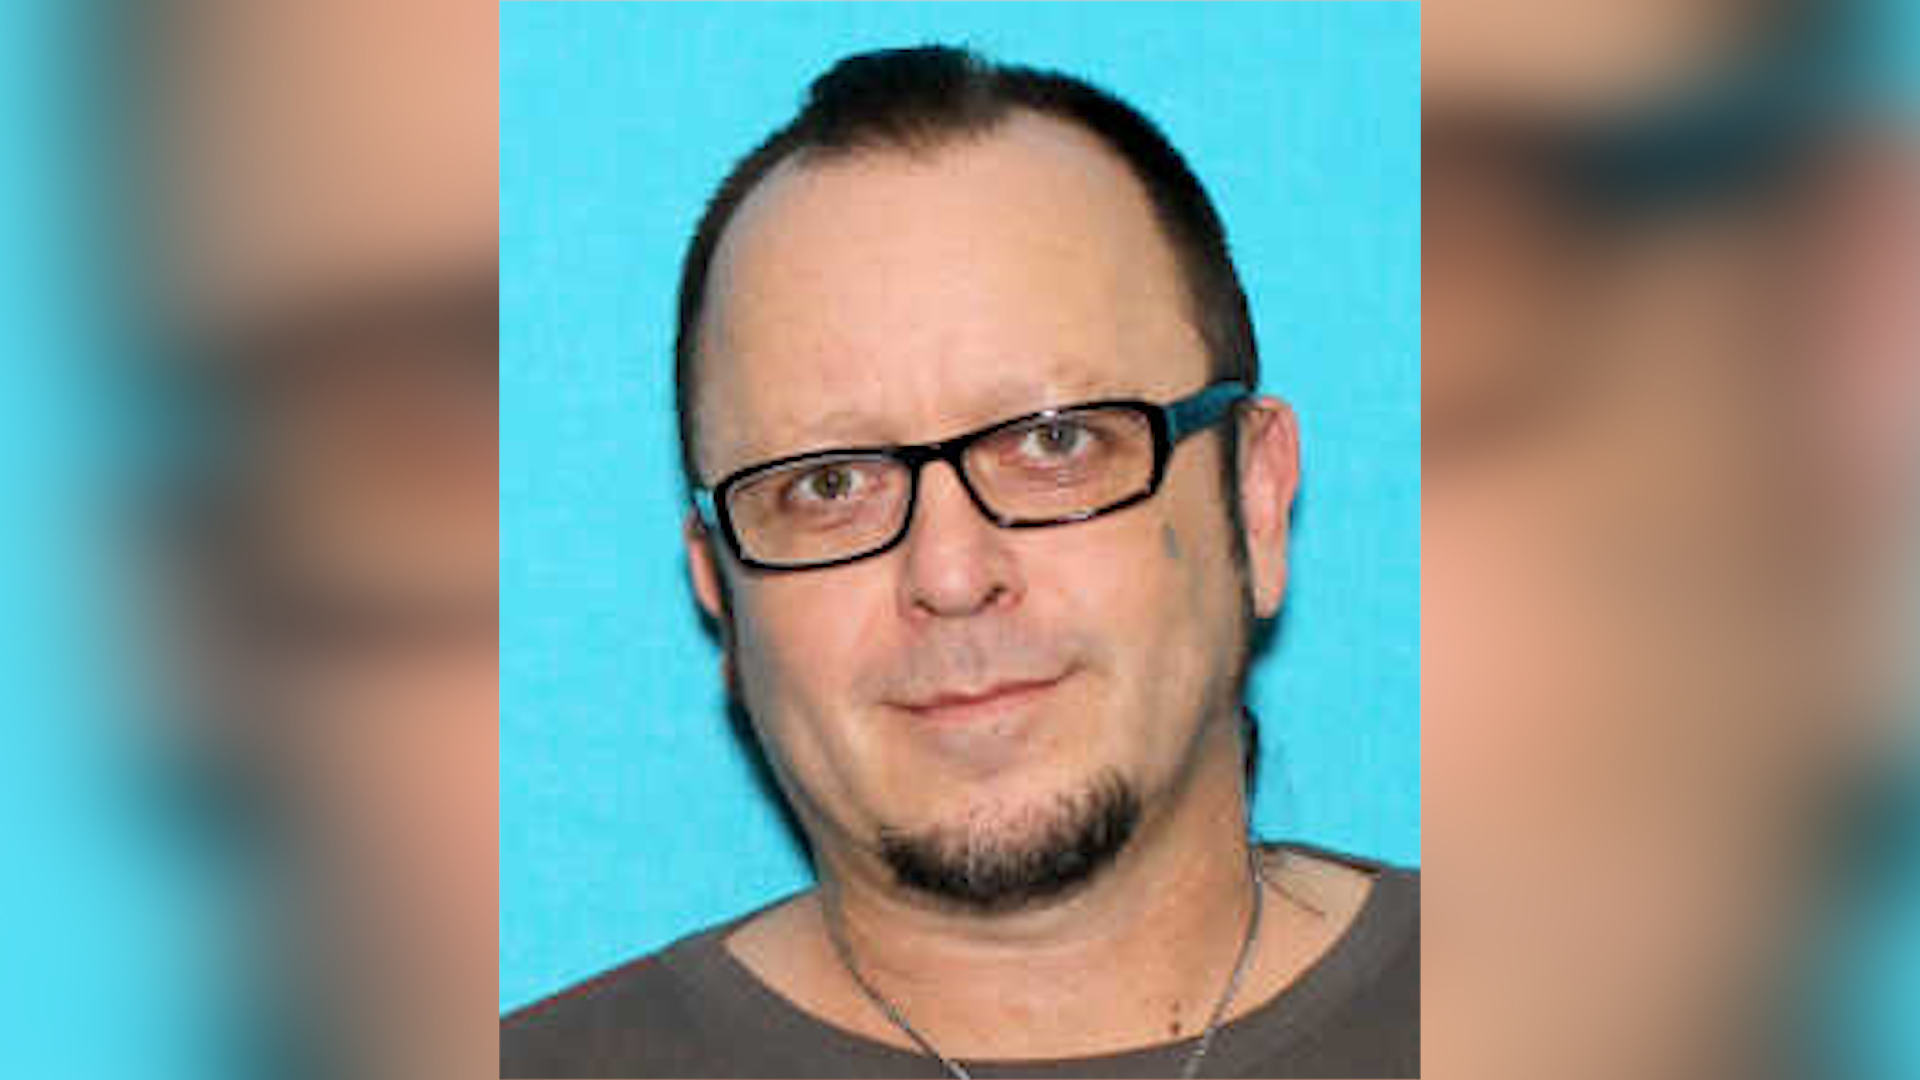 Missing Alpena man has been safely found WBKB 11